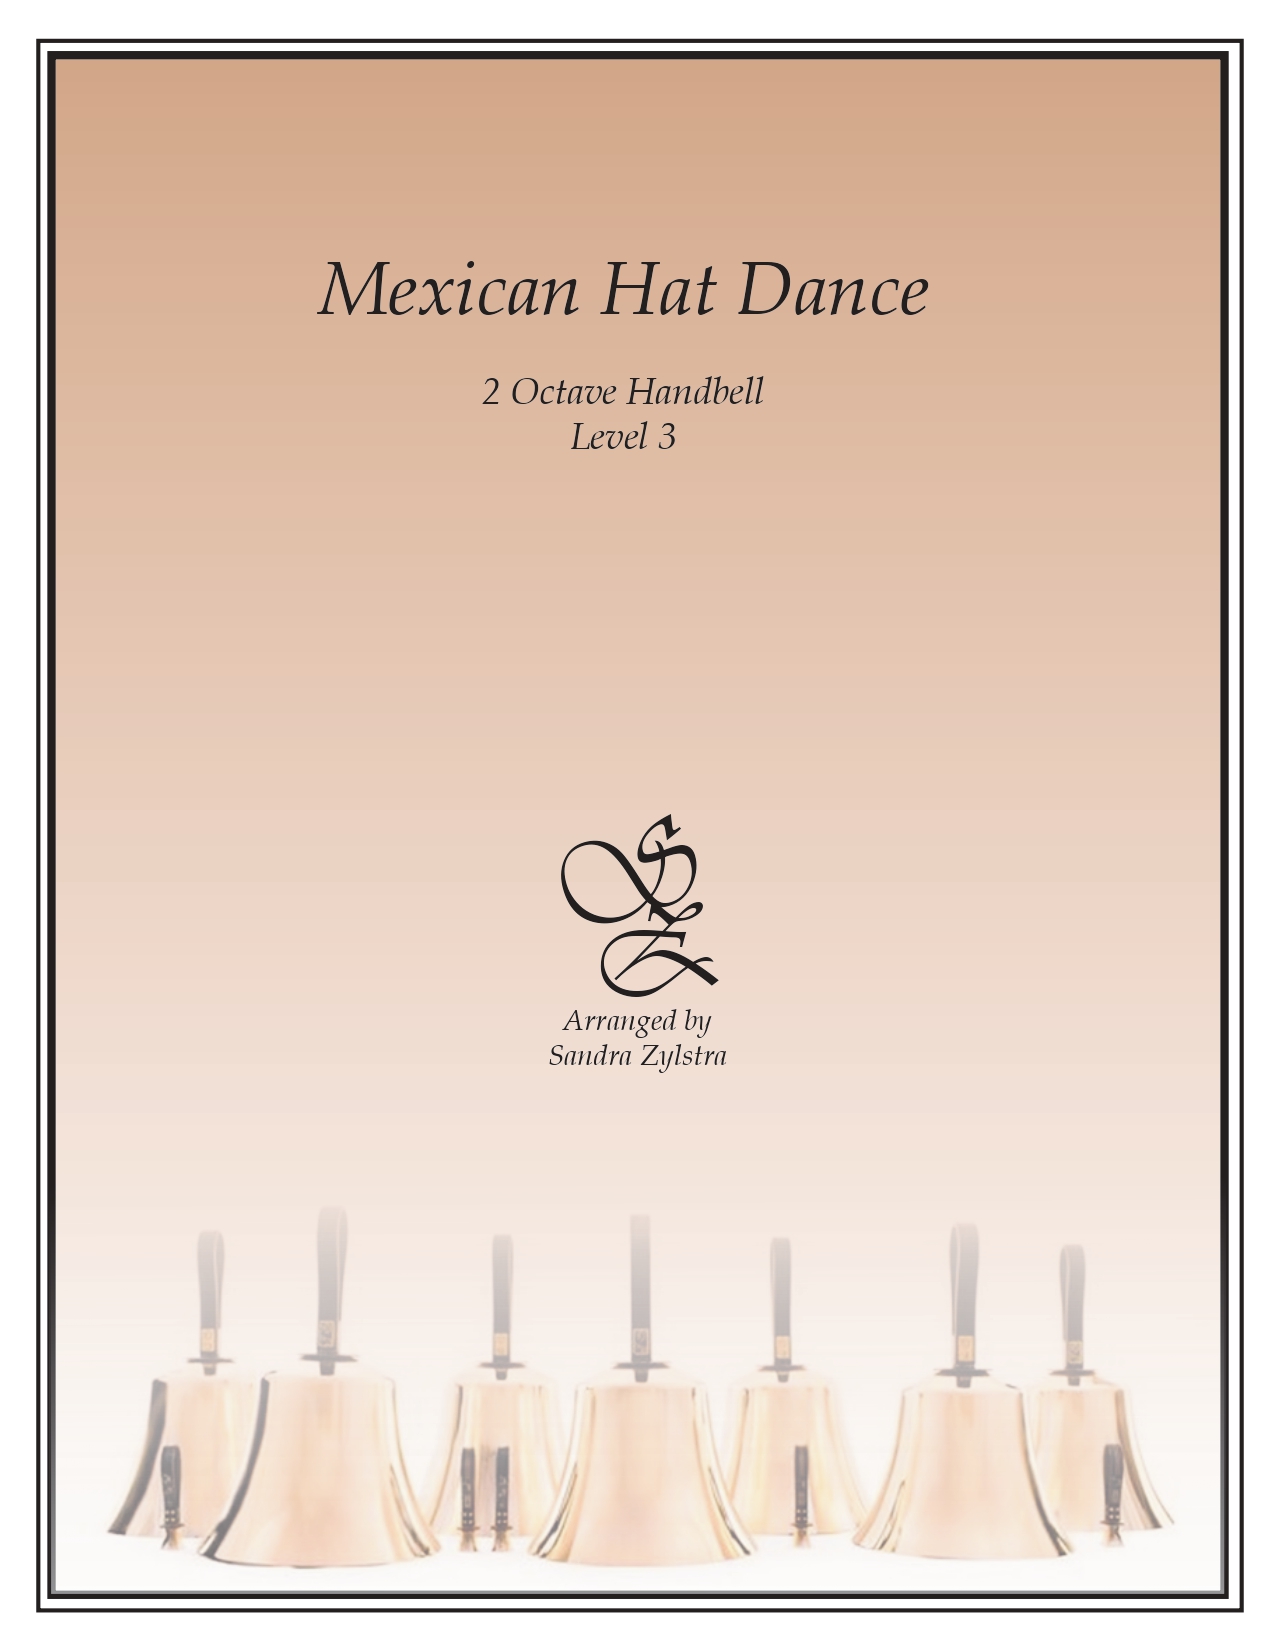 Mexican Hat Dane 2 octave handbells cover page 00011